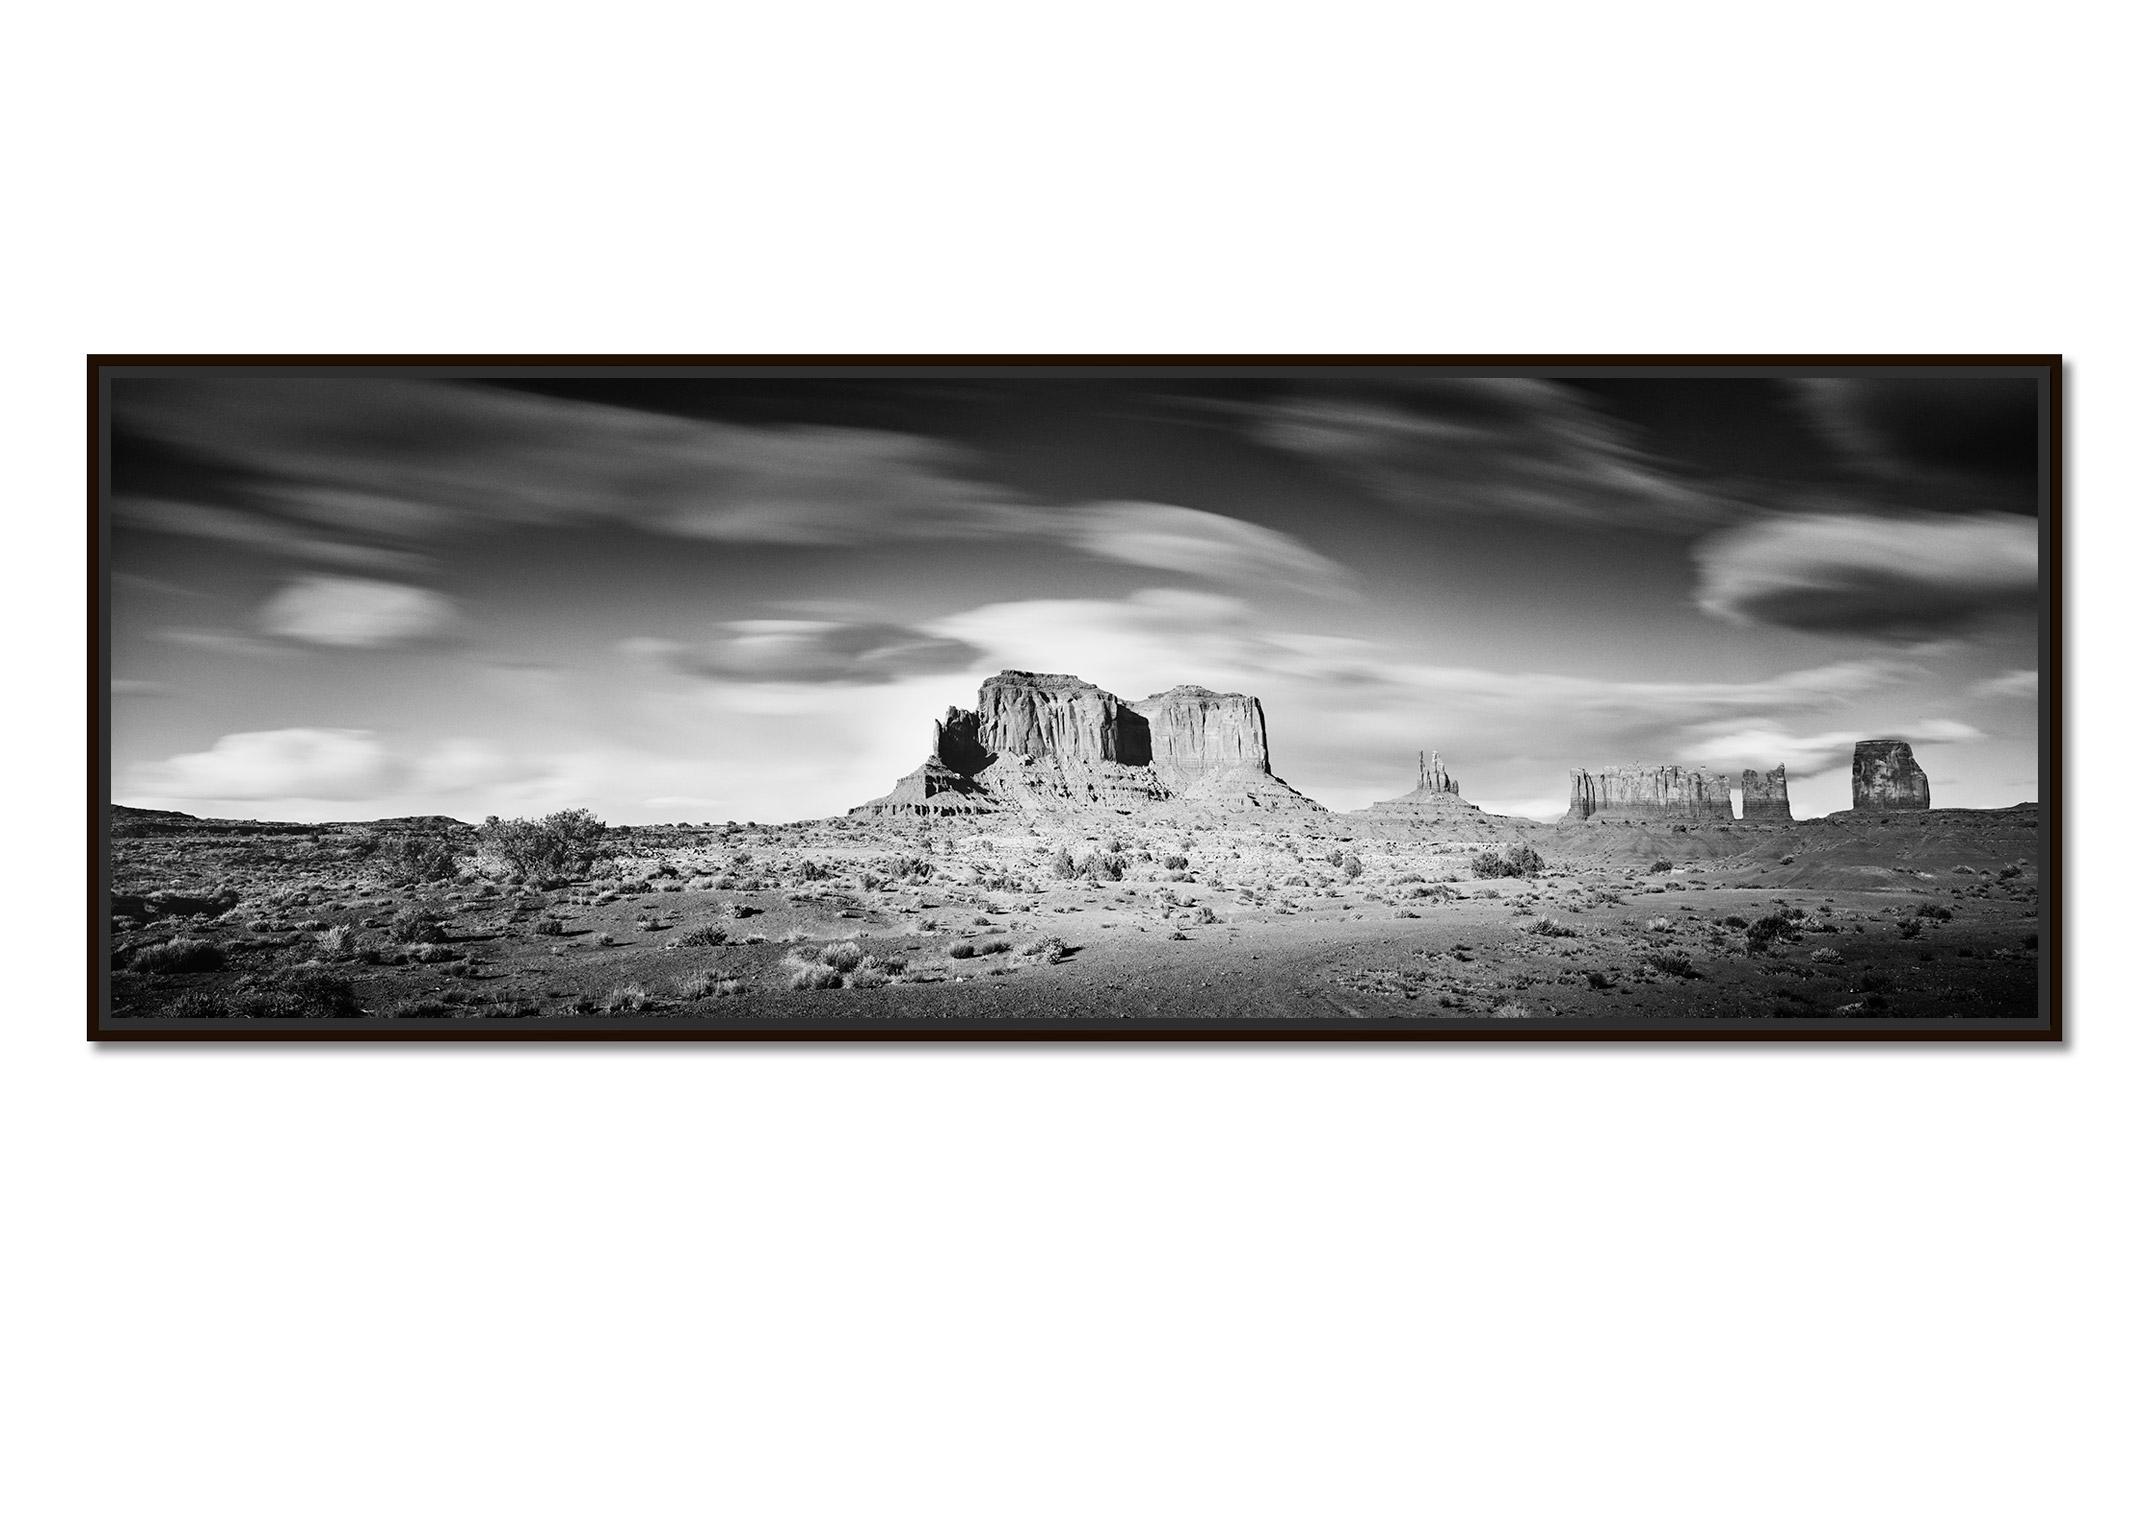 Wild West Panorama monument valley Utah USA black & white fine art photography - Photograph by Gerald Berghammer